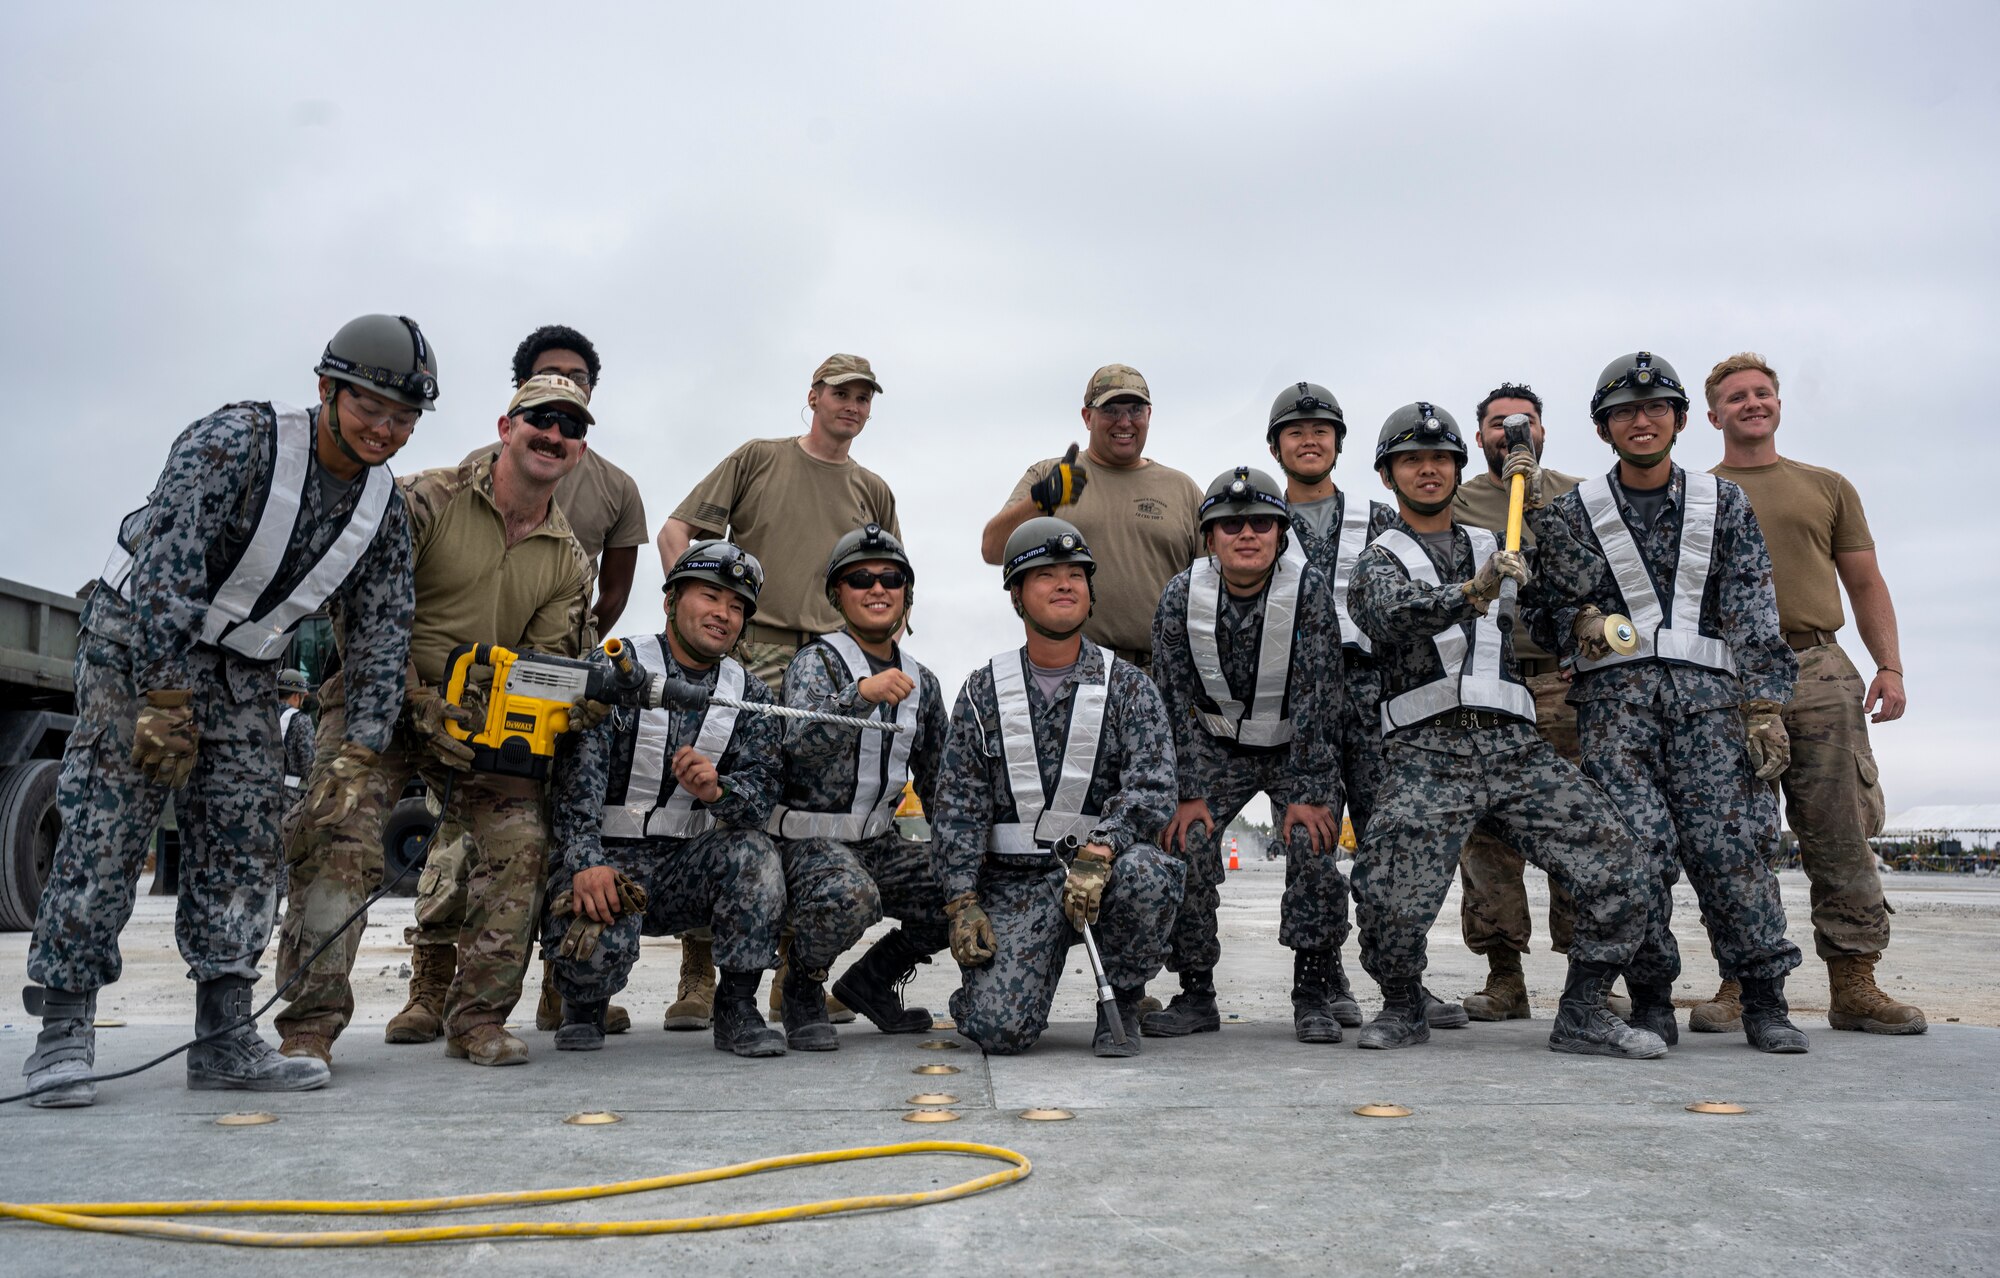 U.S. Air Force Airmen assigned to the 18th Civil Engineer Group and Japan Air Self-Defense Force Airmen assigned to the Western Air Civil Engineering Group pose for a group photo during a bilateral live fire exercise.